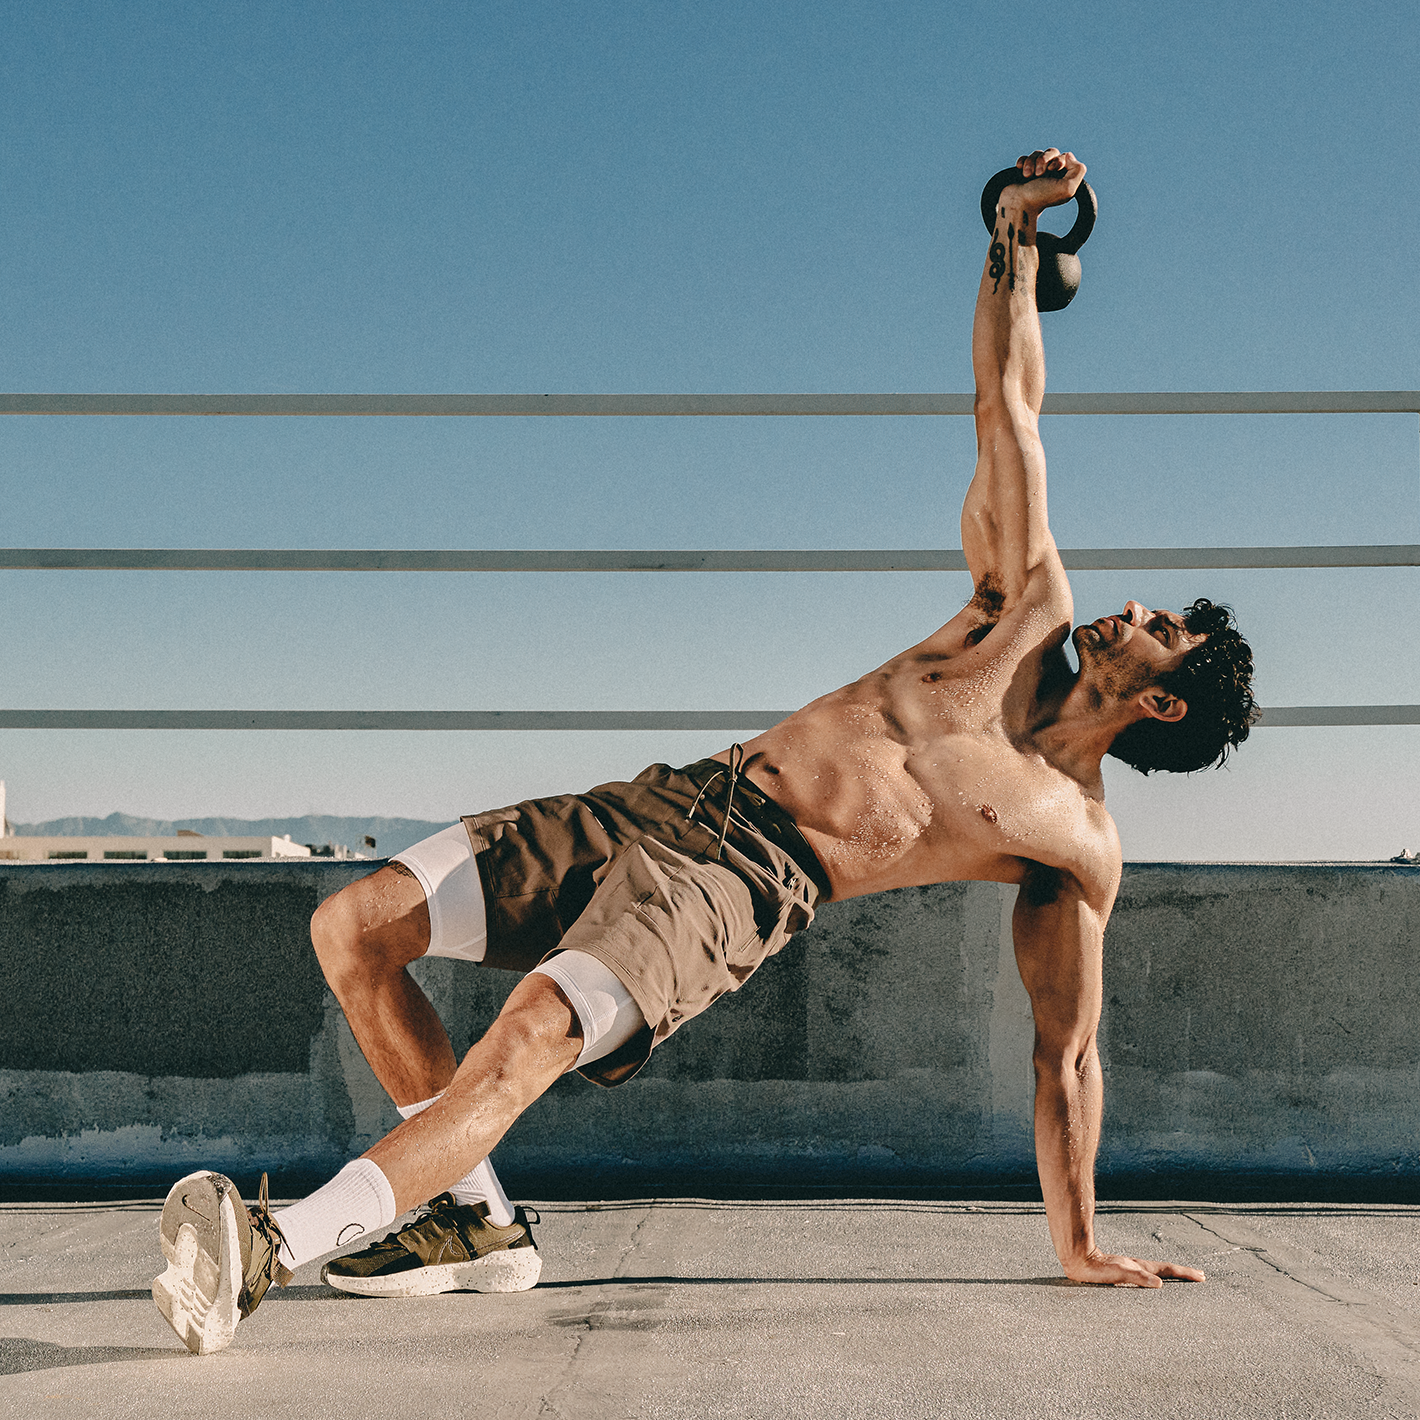 Man outdoors lifting a weighted kettlebell over his head, while stretching.